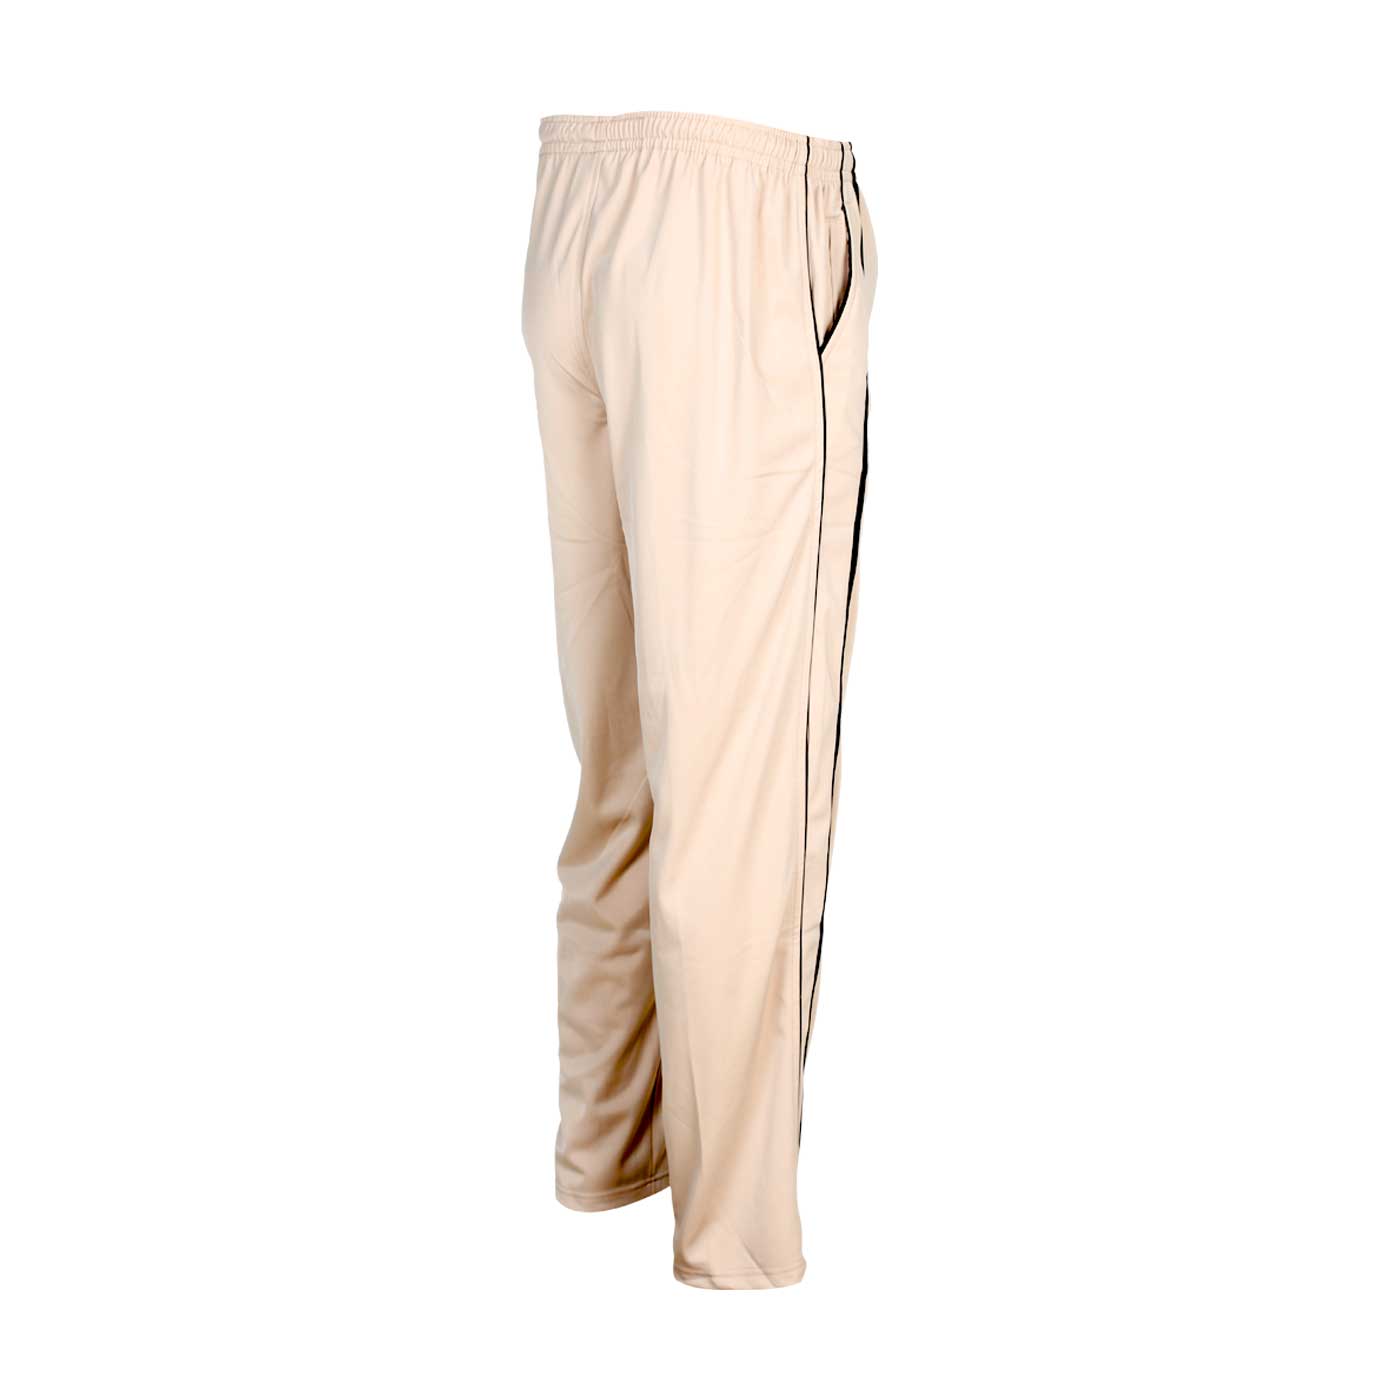 Trousers For Men - PLUS 8000 : Buy Online At Best Prices In Pakistan ...